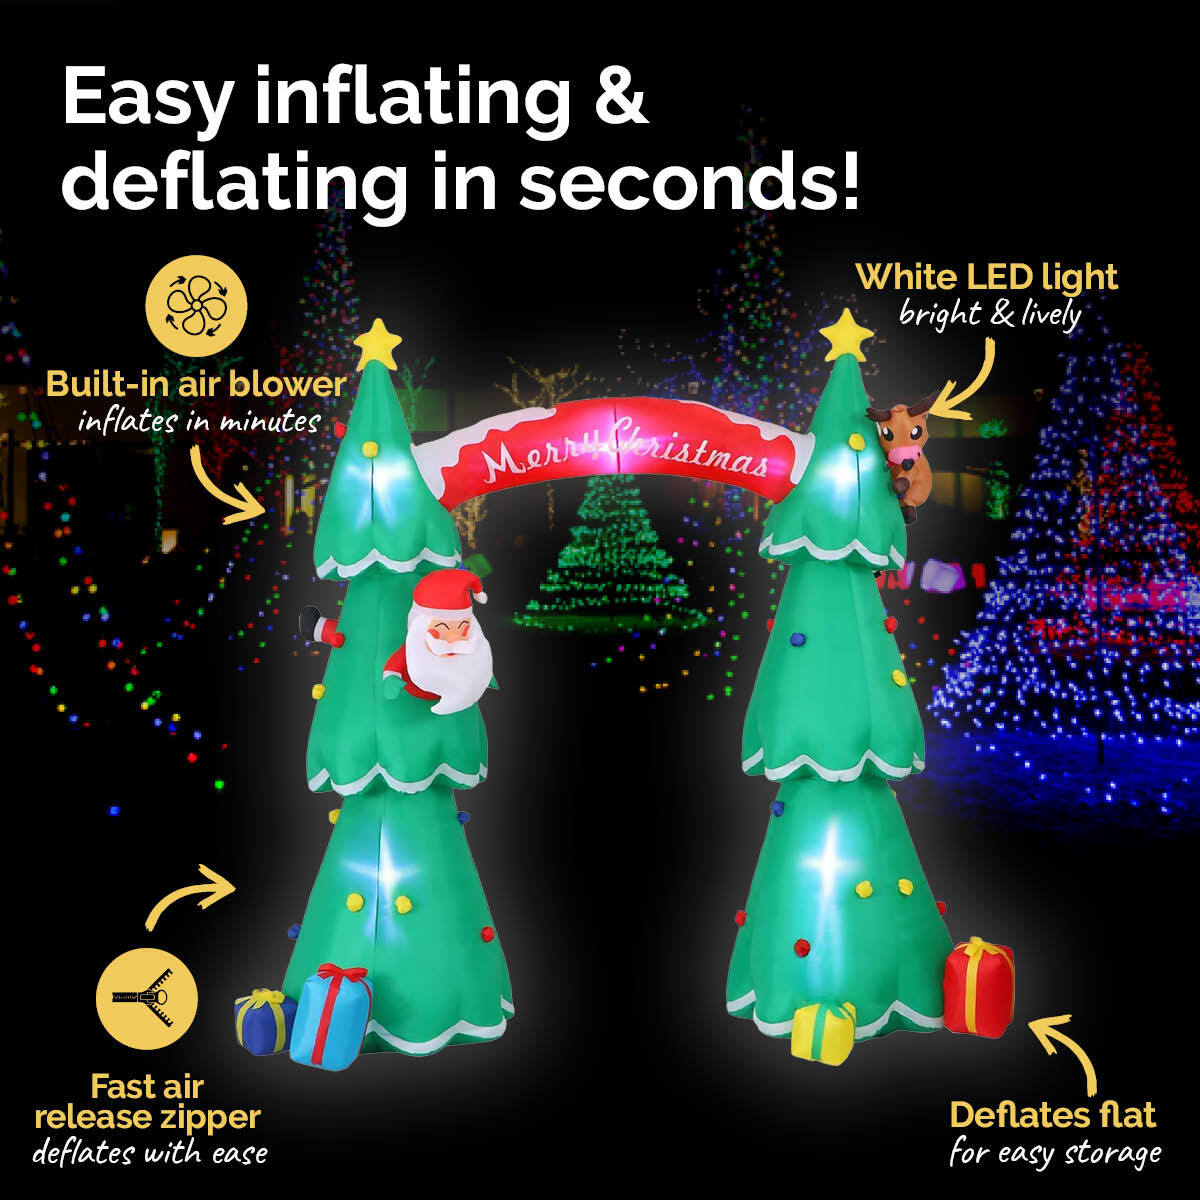 Christmas By Sas 3m x 2.4m Christmas Tree Arch Self Inflating LED Lights Deals499